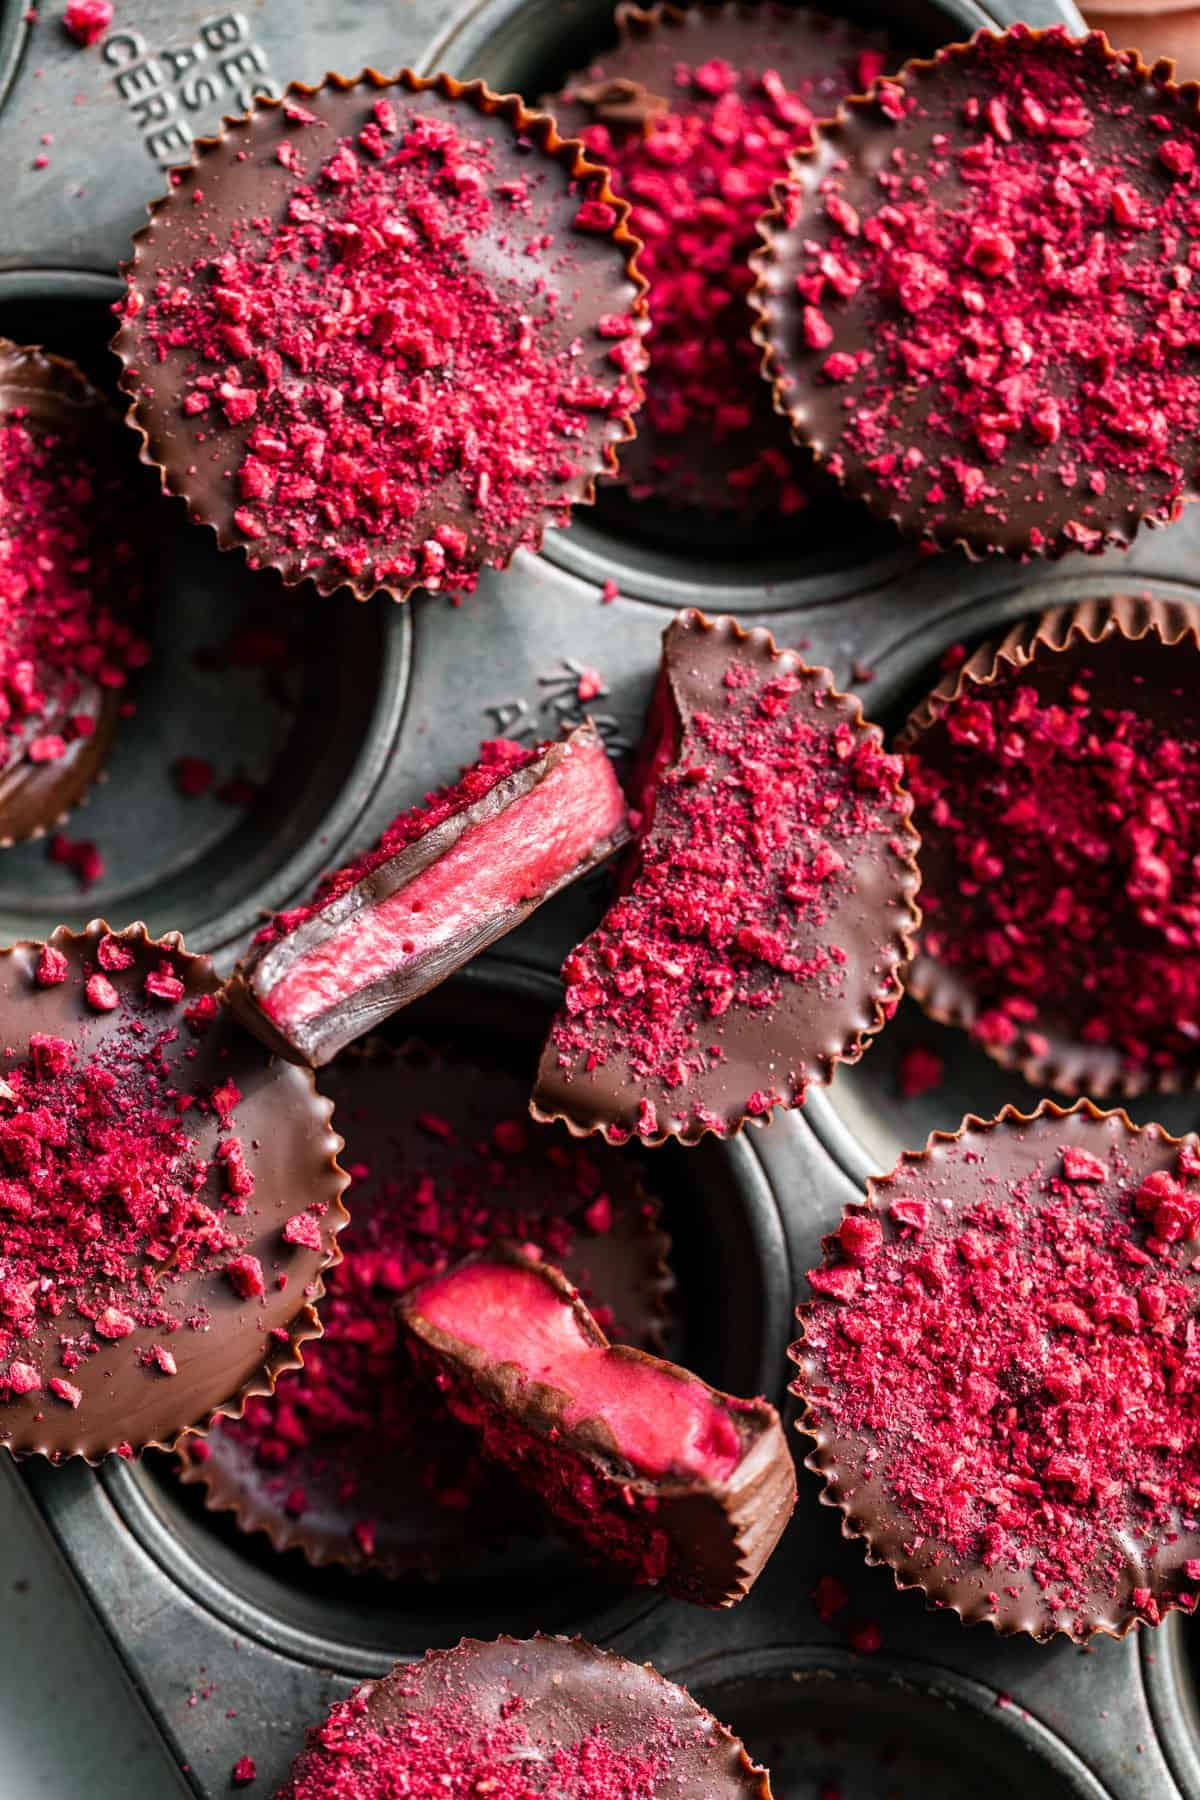 Chocolate Raspberry Candies in a vintage muffin tin with two cut open to see the filling.